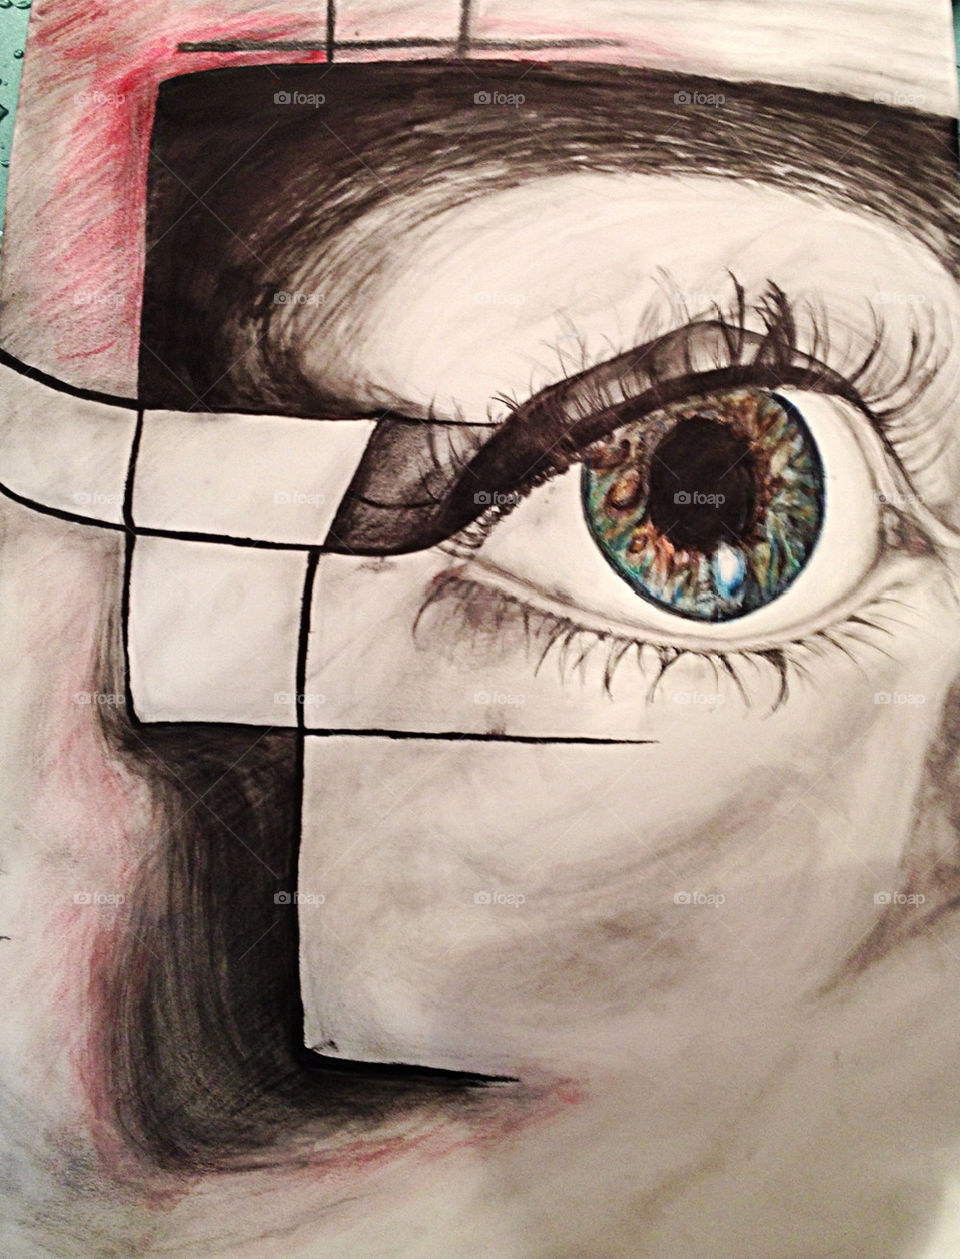 A drawing version of my sisters eye and makeup!